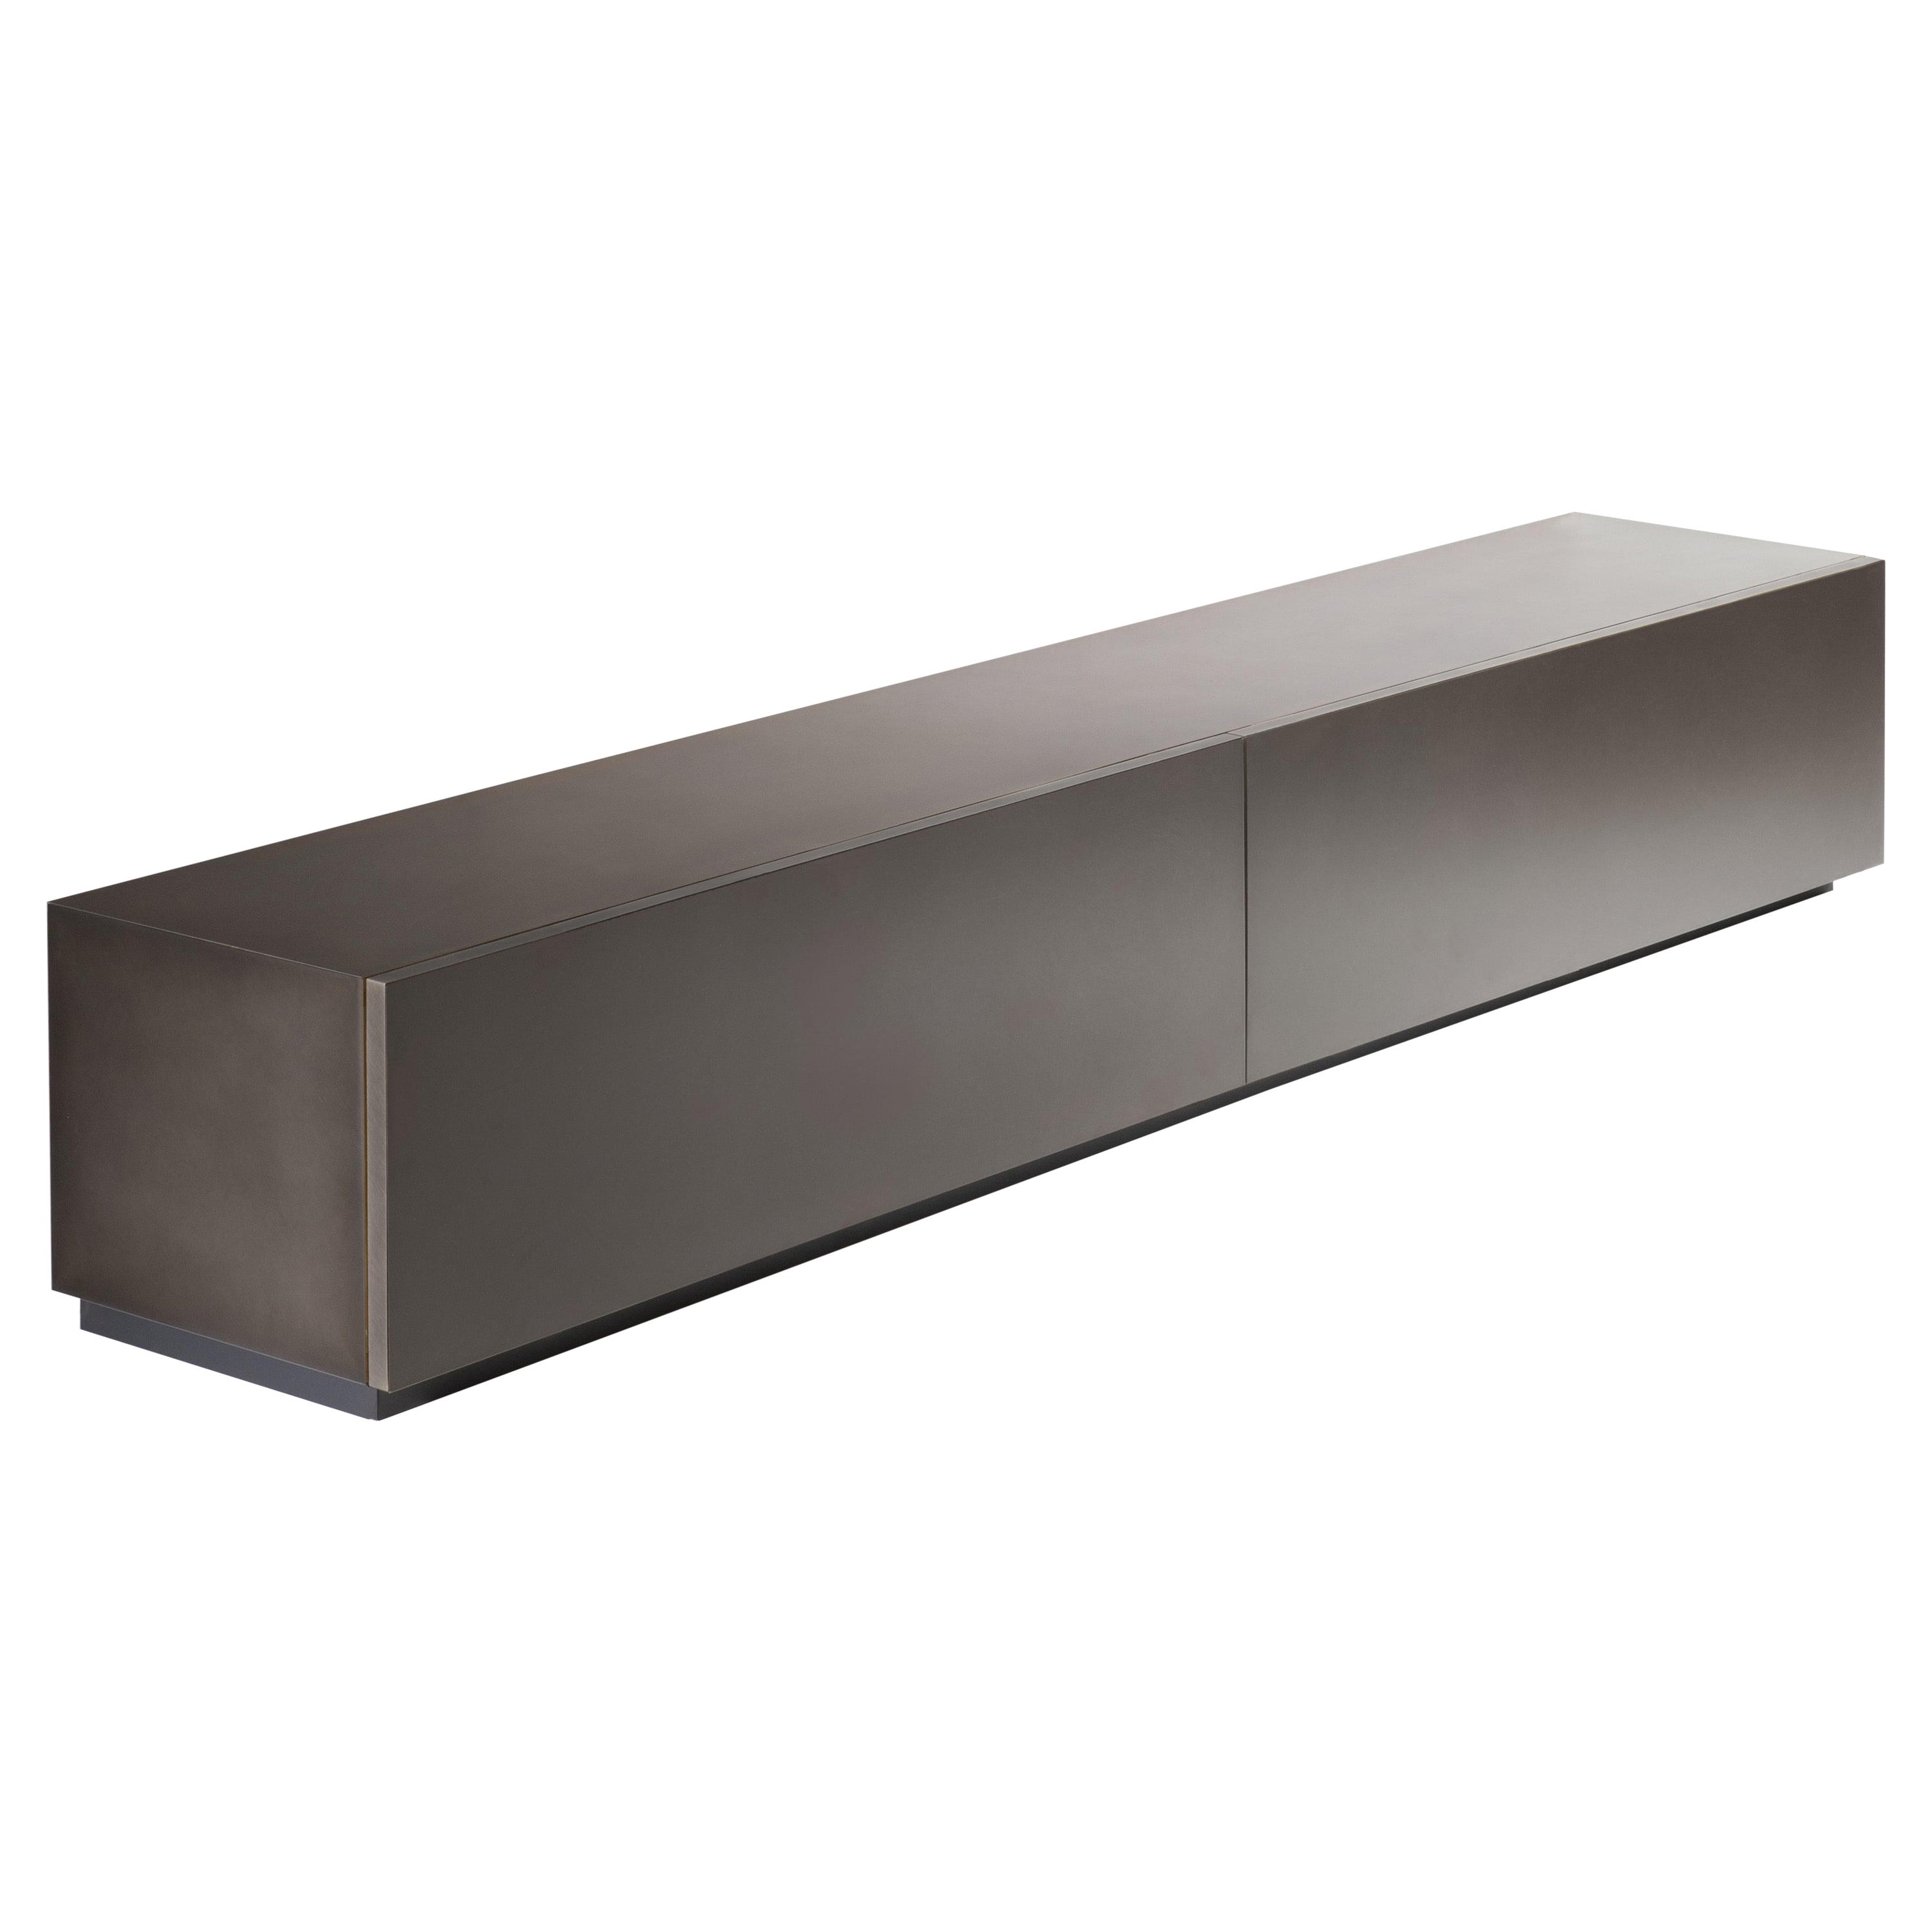 DeCastelli Large Tako Cabinet in DeLabré B E5 Stainless Steel by Filippo Pisan For Sale